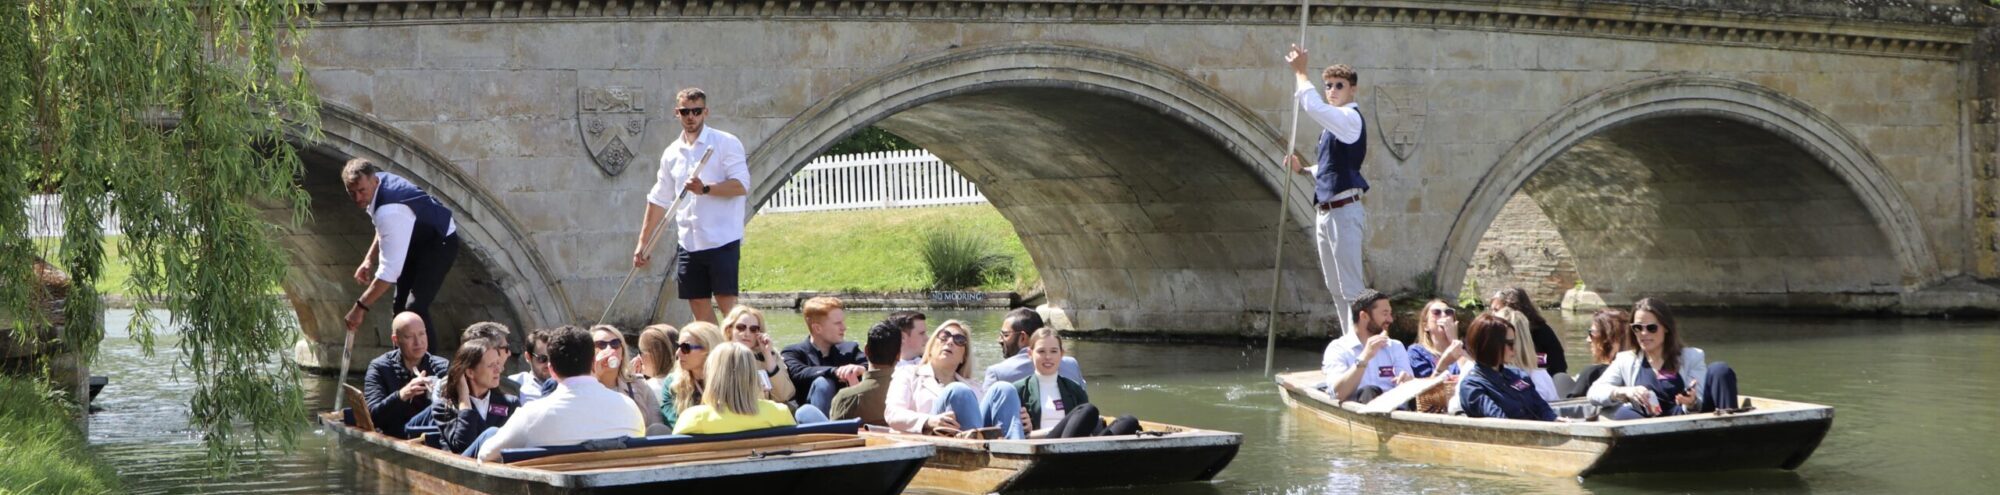 Hen Party Punting Cambridge